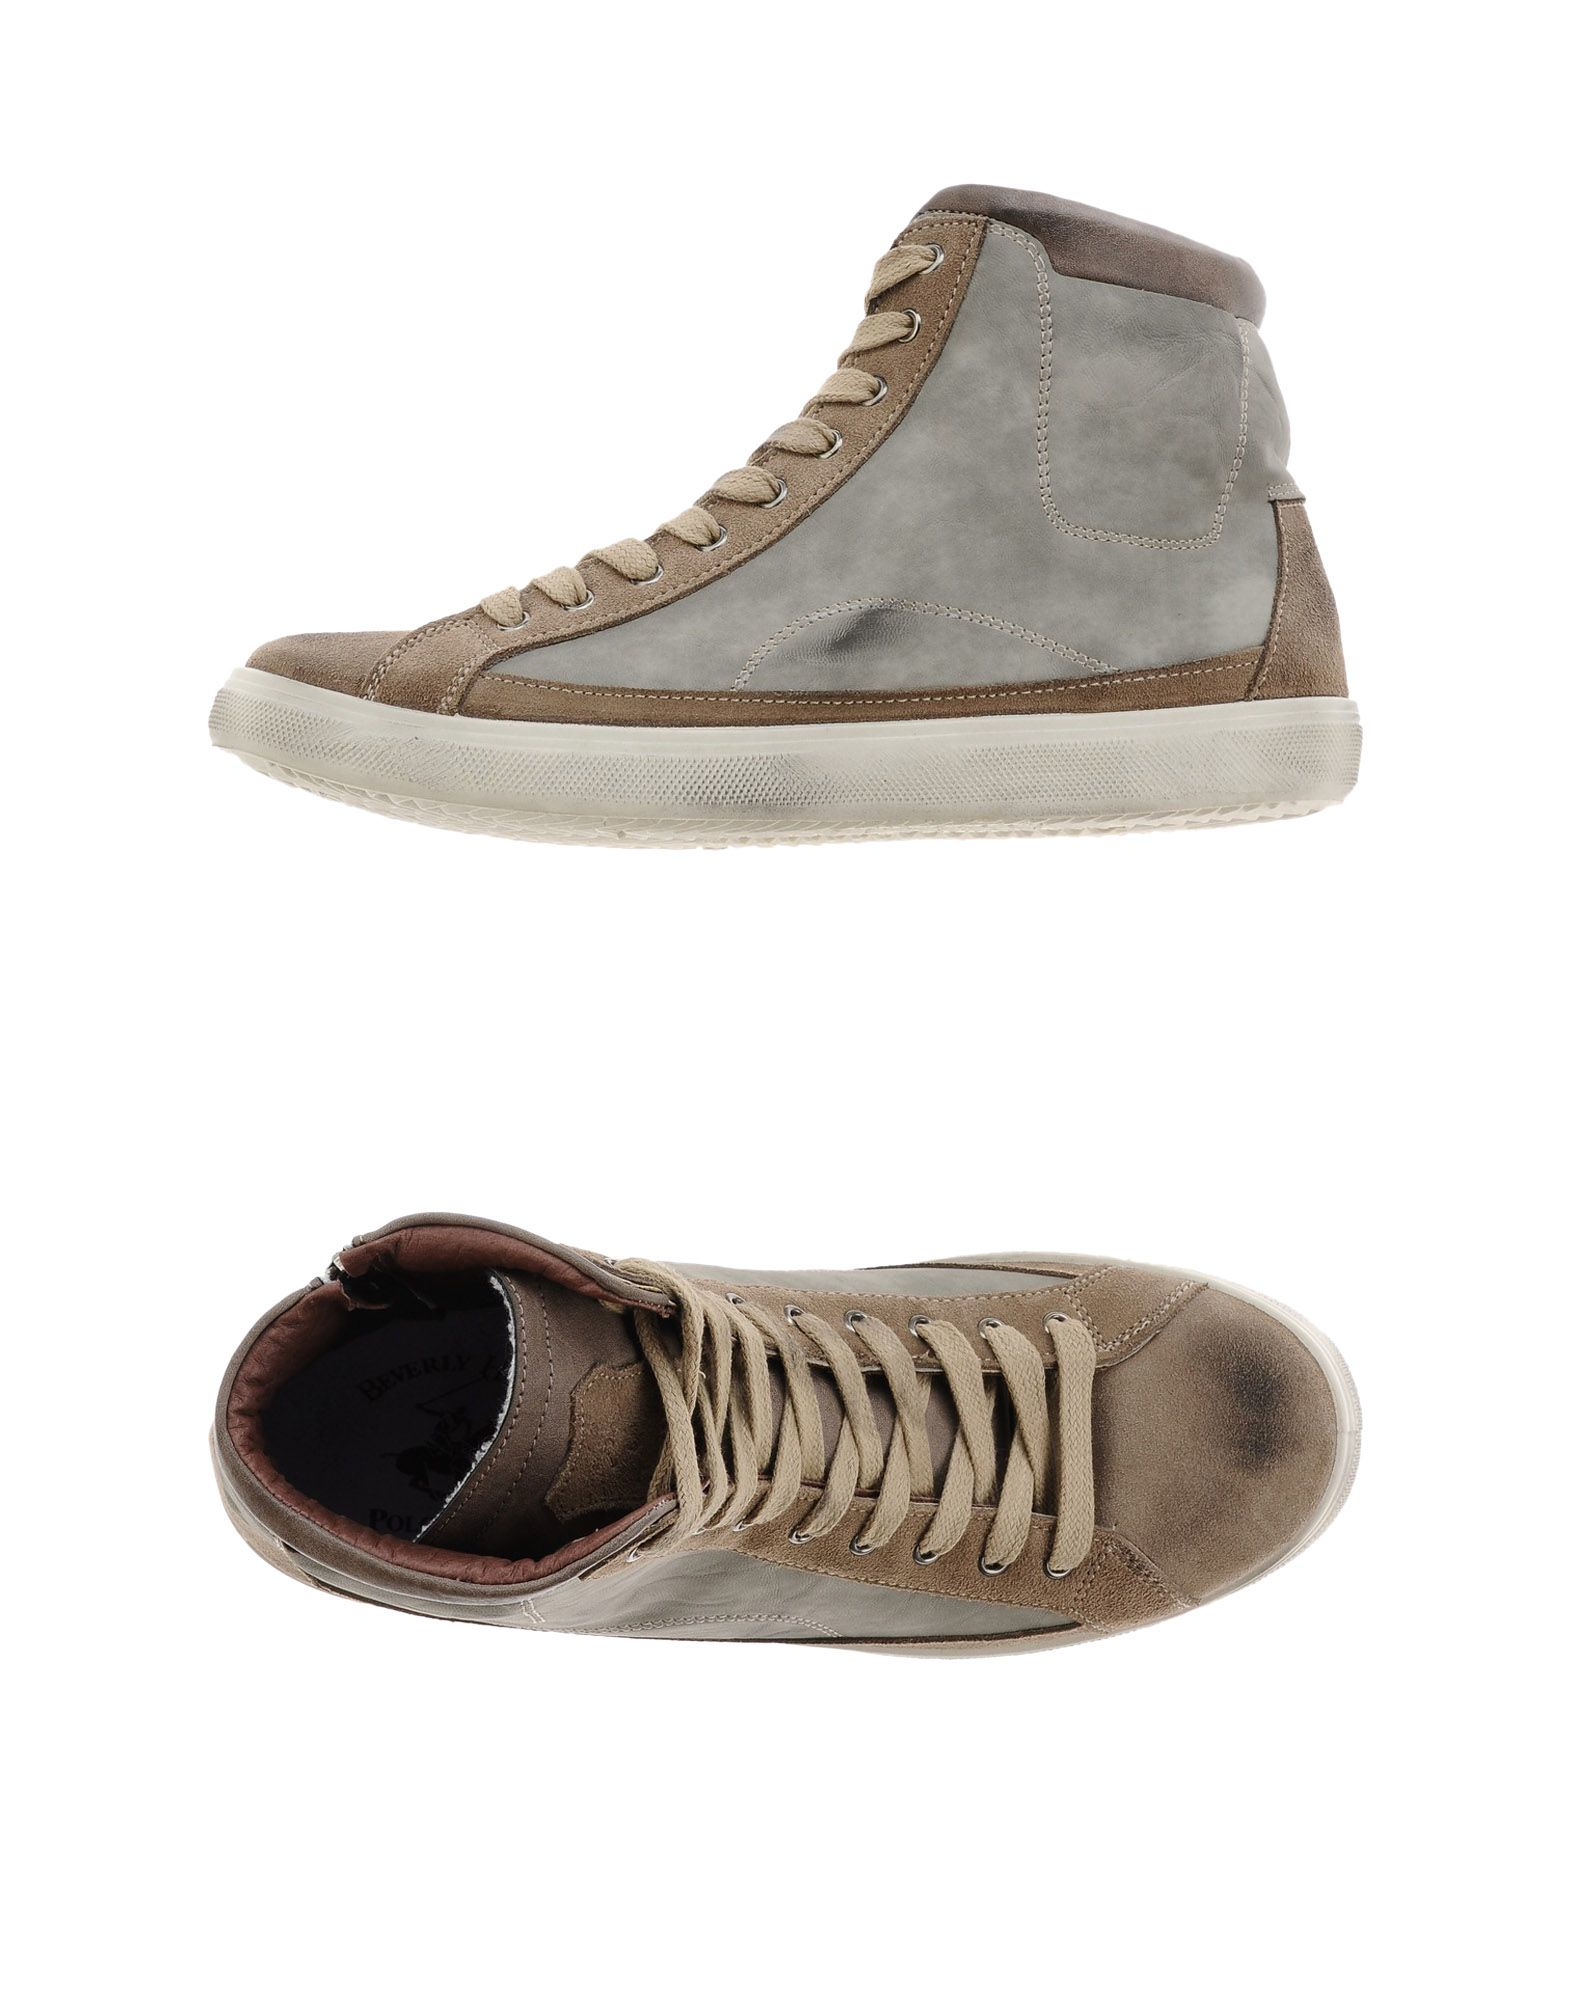 Lyst - Beverly Hills Polo Club High-tops & Trainers in Gray for Men